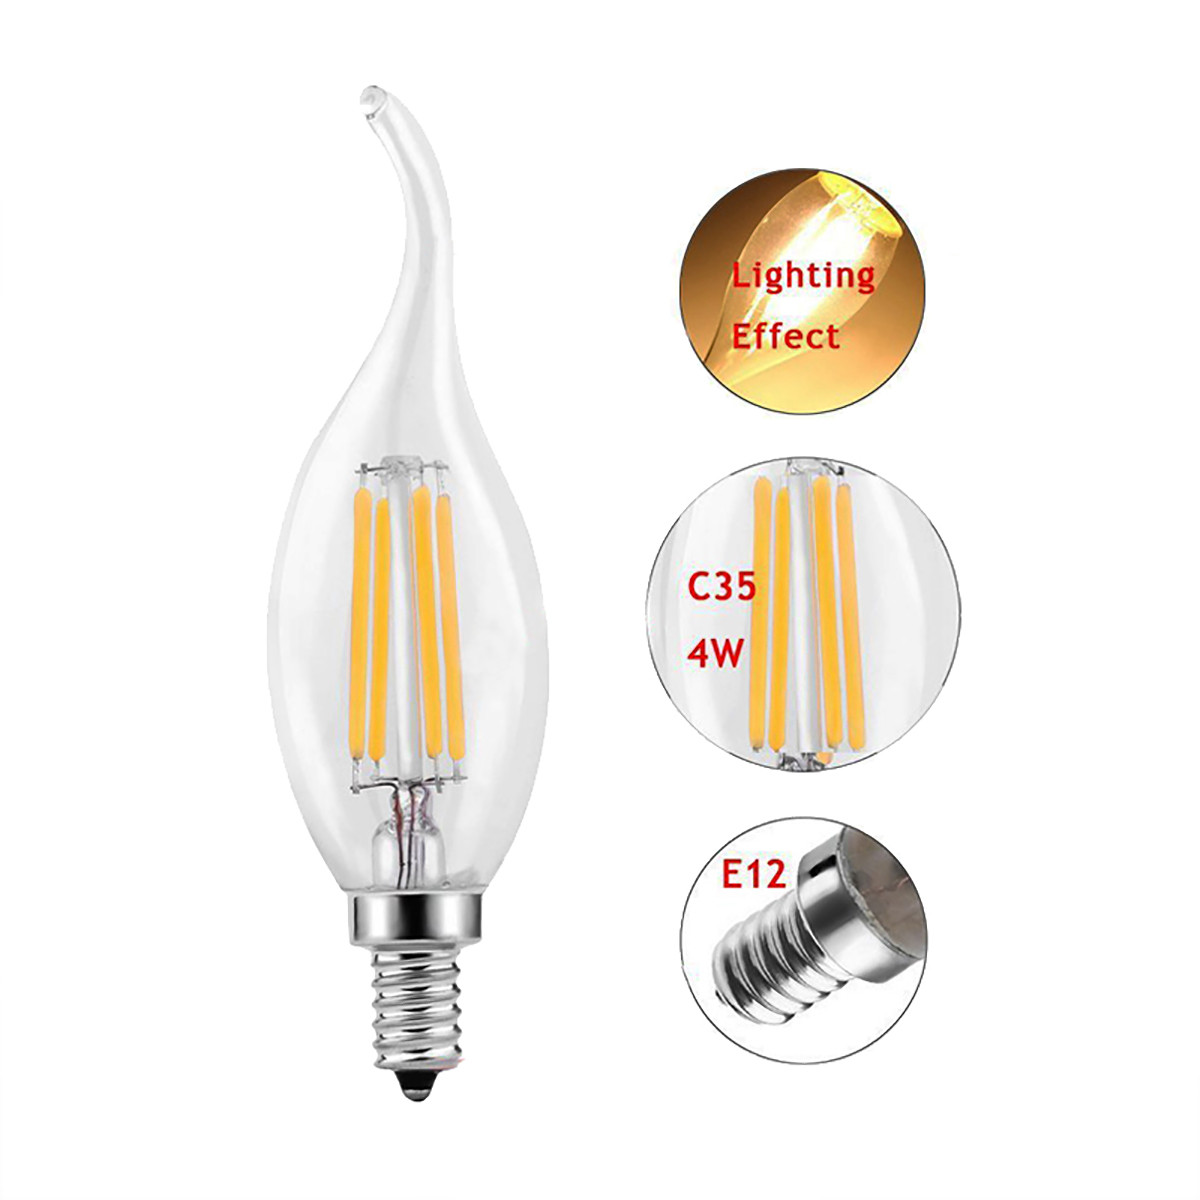 C35 Flame Shape Bent Tip LAFEINA 9 Pack 6W Dimmable LED Filament Candle Light Bulbs 2700K Warm White 600LM 60W Incandescent Replacement E12 Candelabra Base 